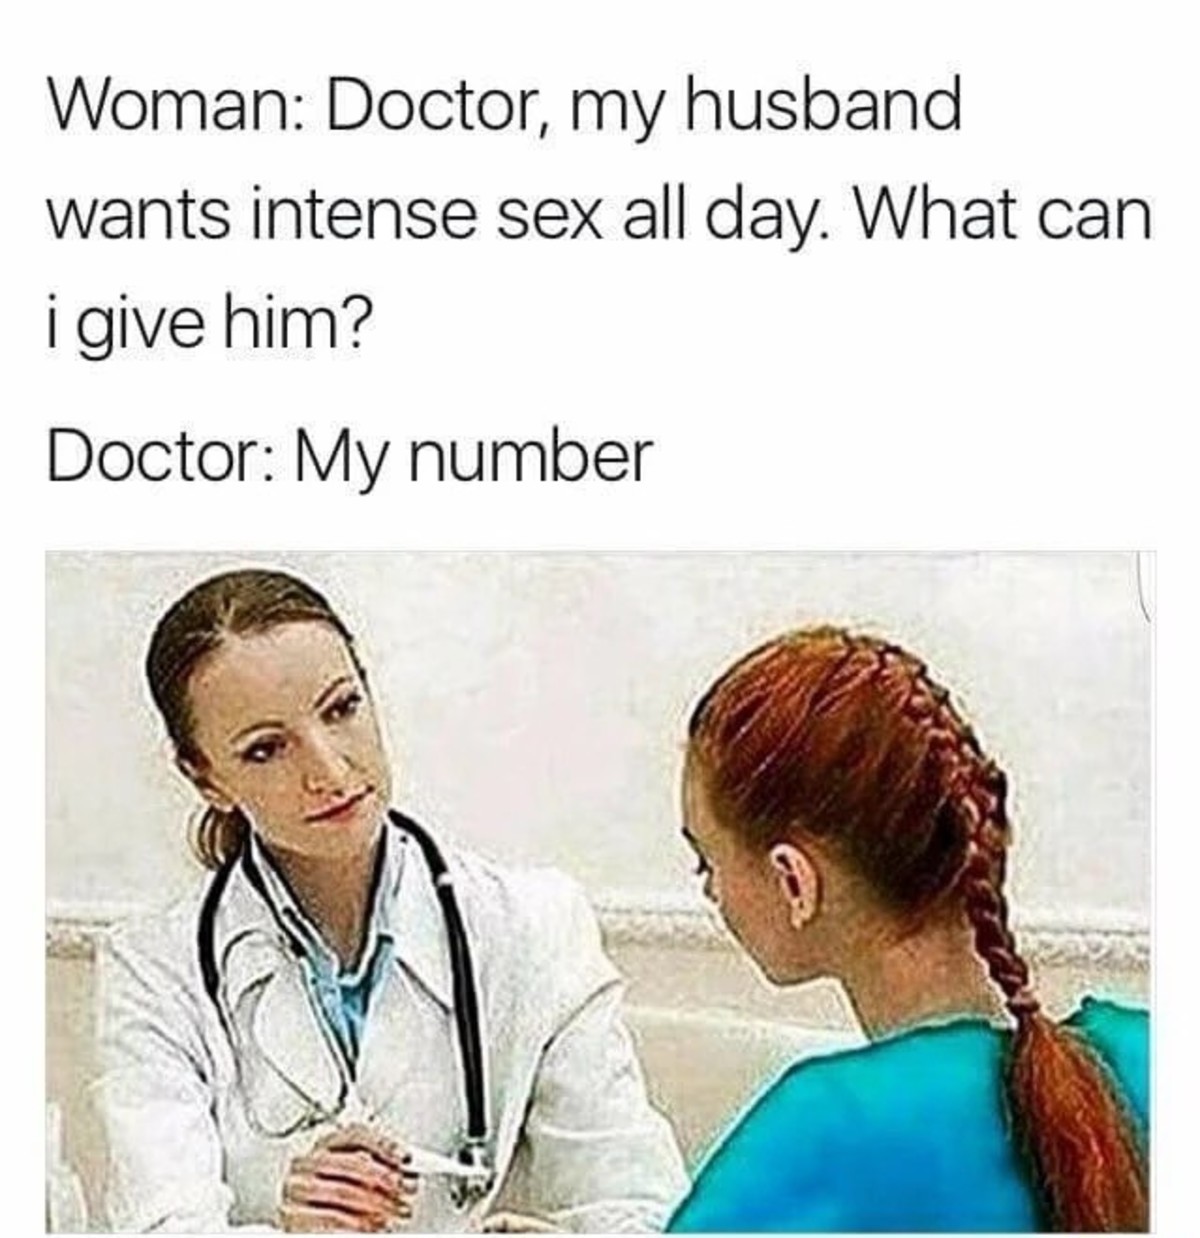 doctor, my husband wants intense sex all day funny picture, my husband wants intense sex all day what can i give him funny picture